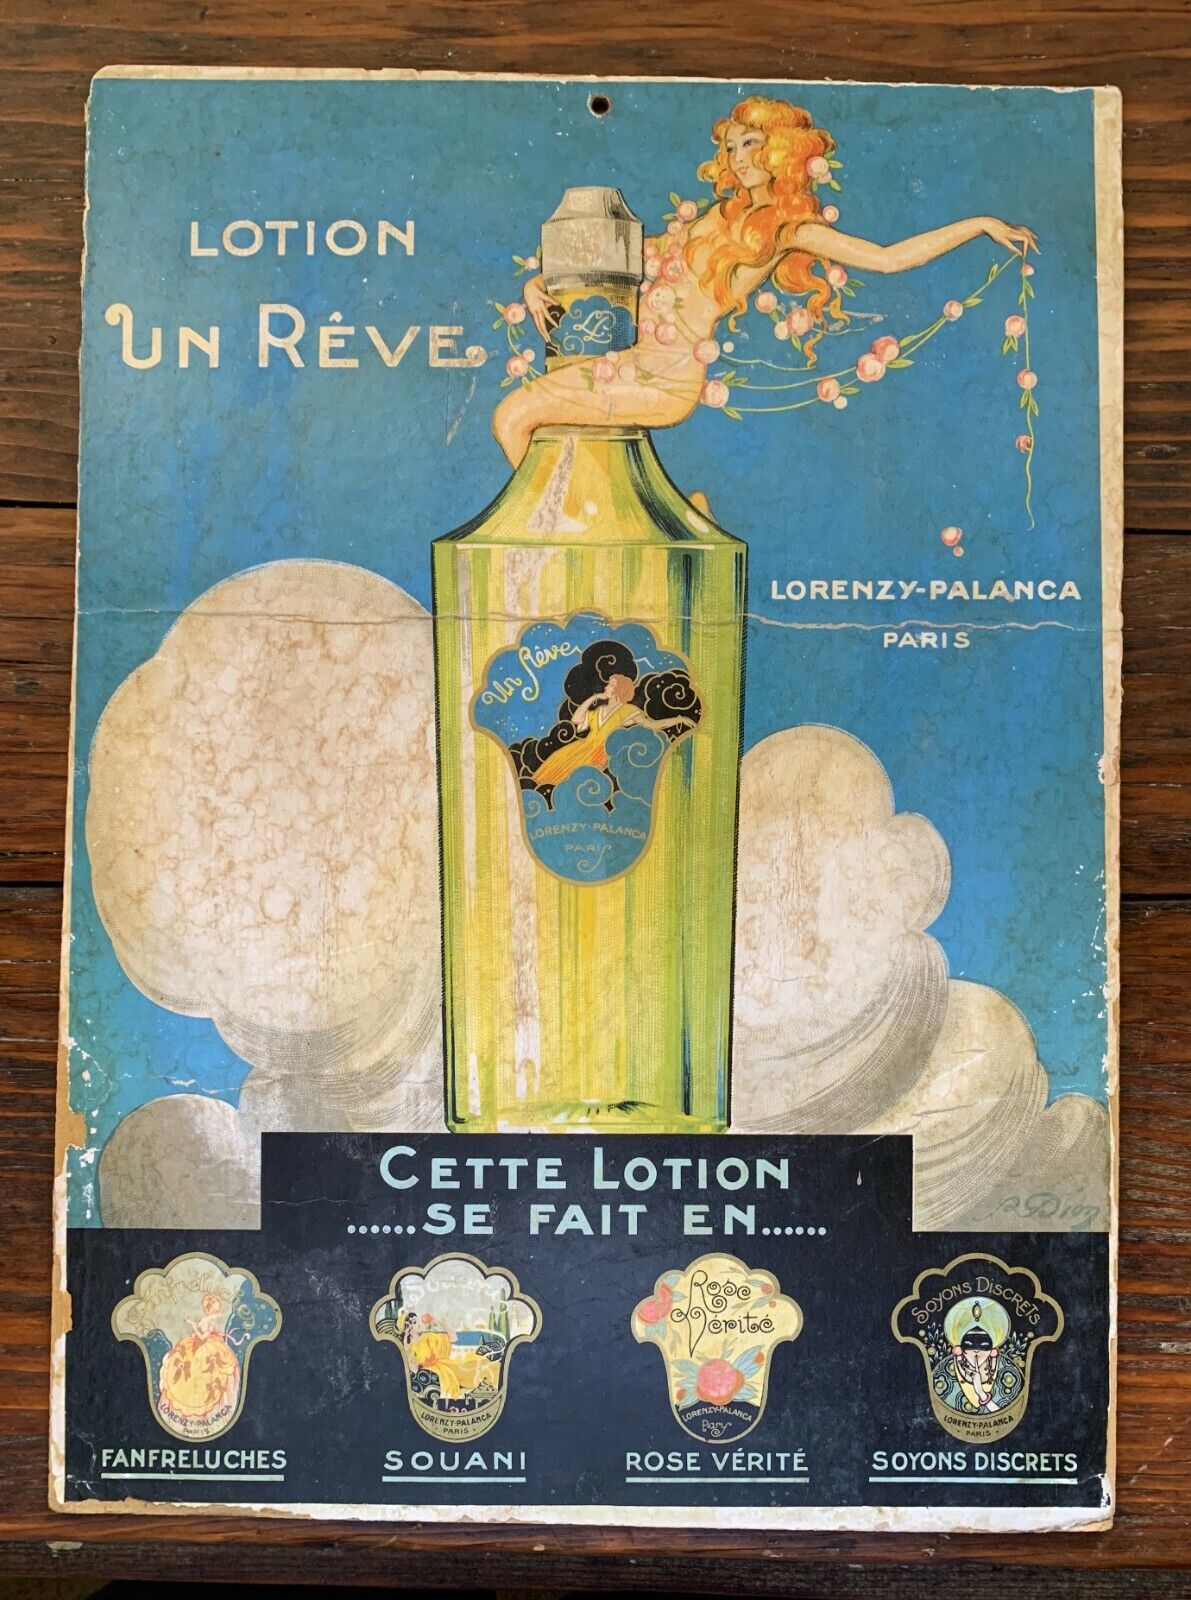 Original Antique 1920s French Cosmetics Advertising Poster for \